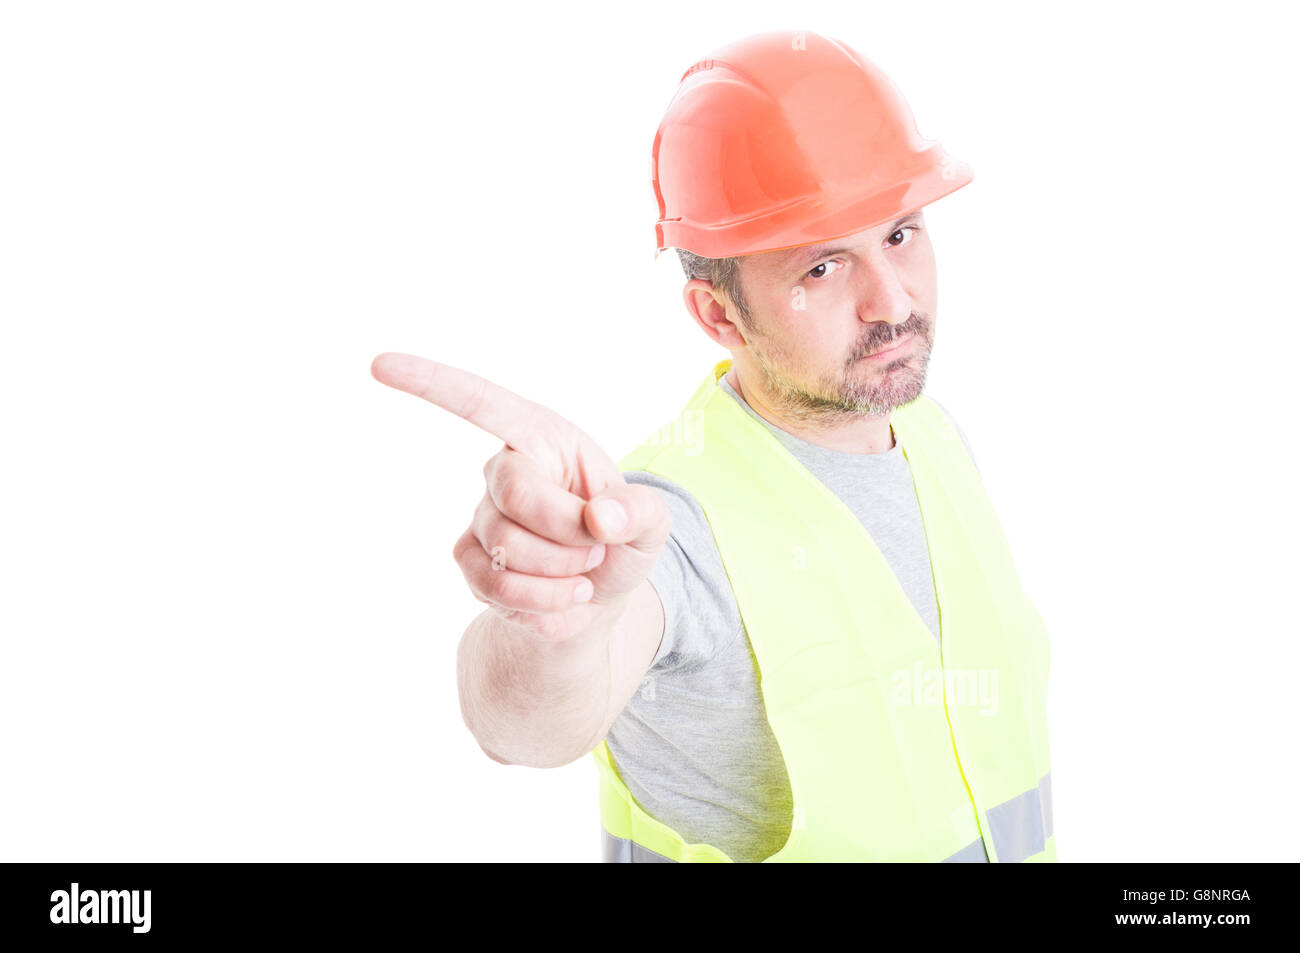 Portrait of serious constructor making refuse or no gesture with index finger isolated on white background Stock Photo